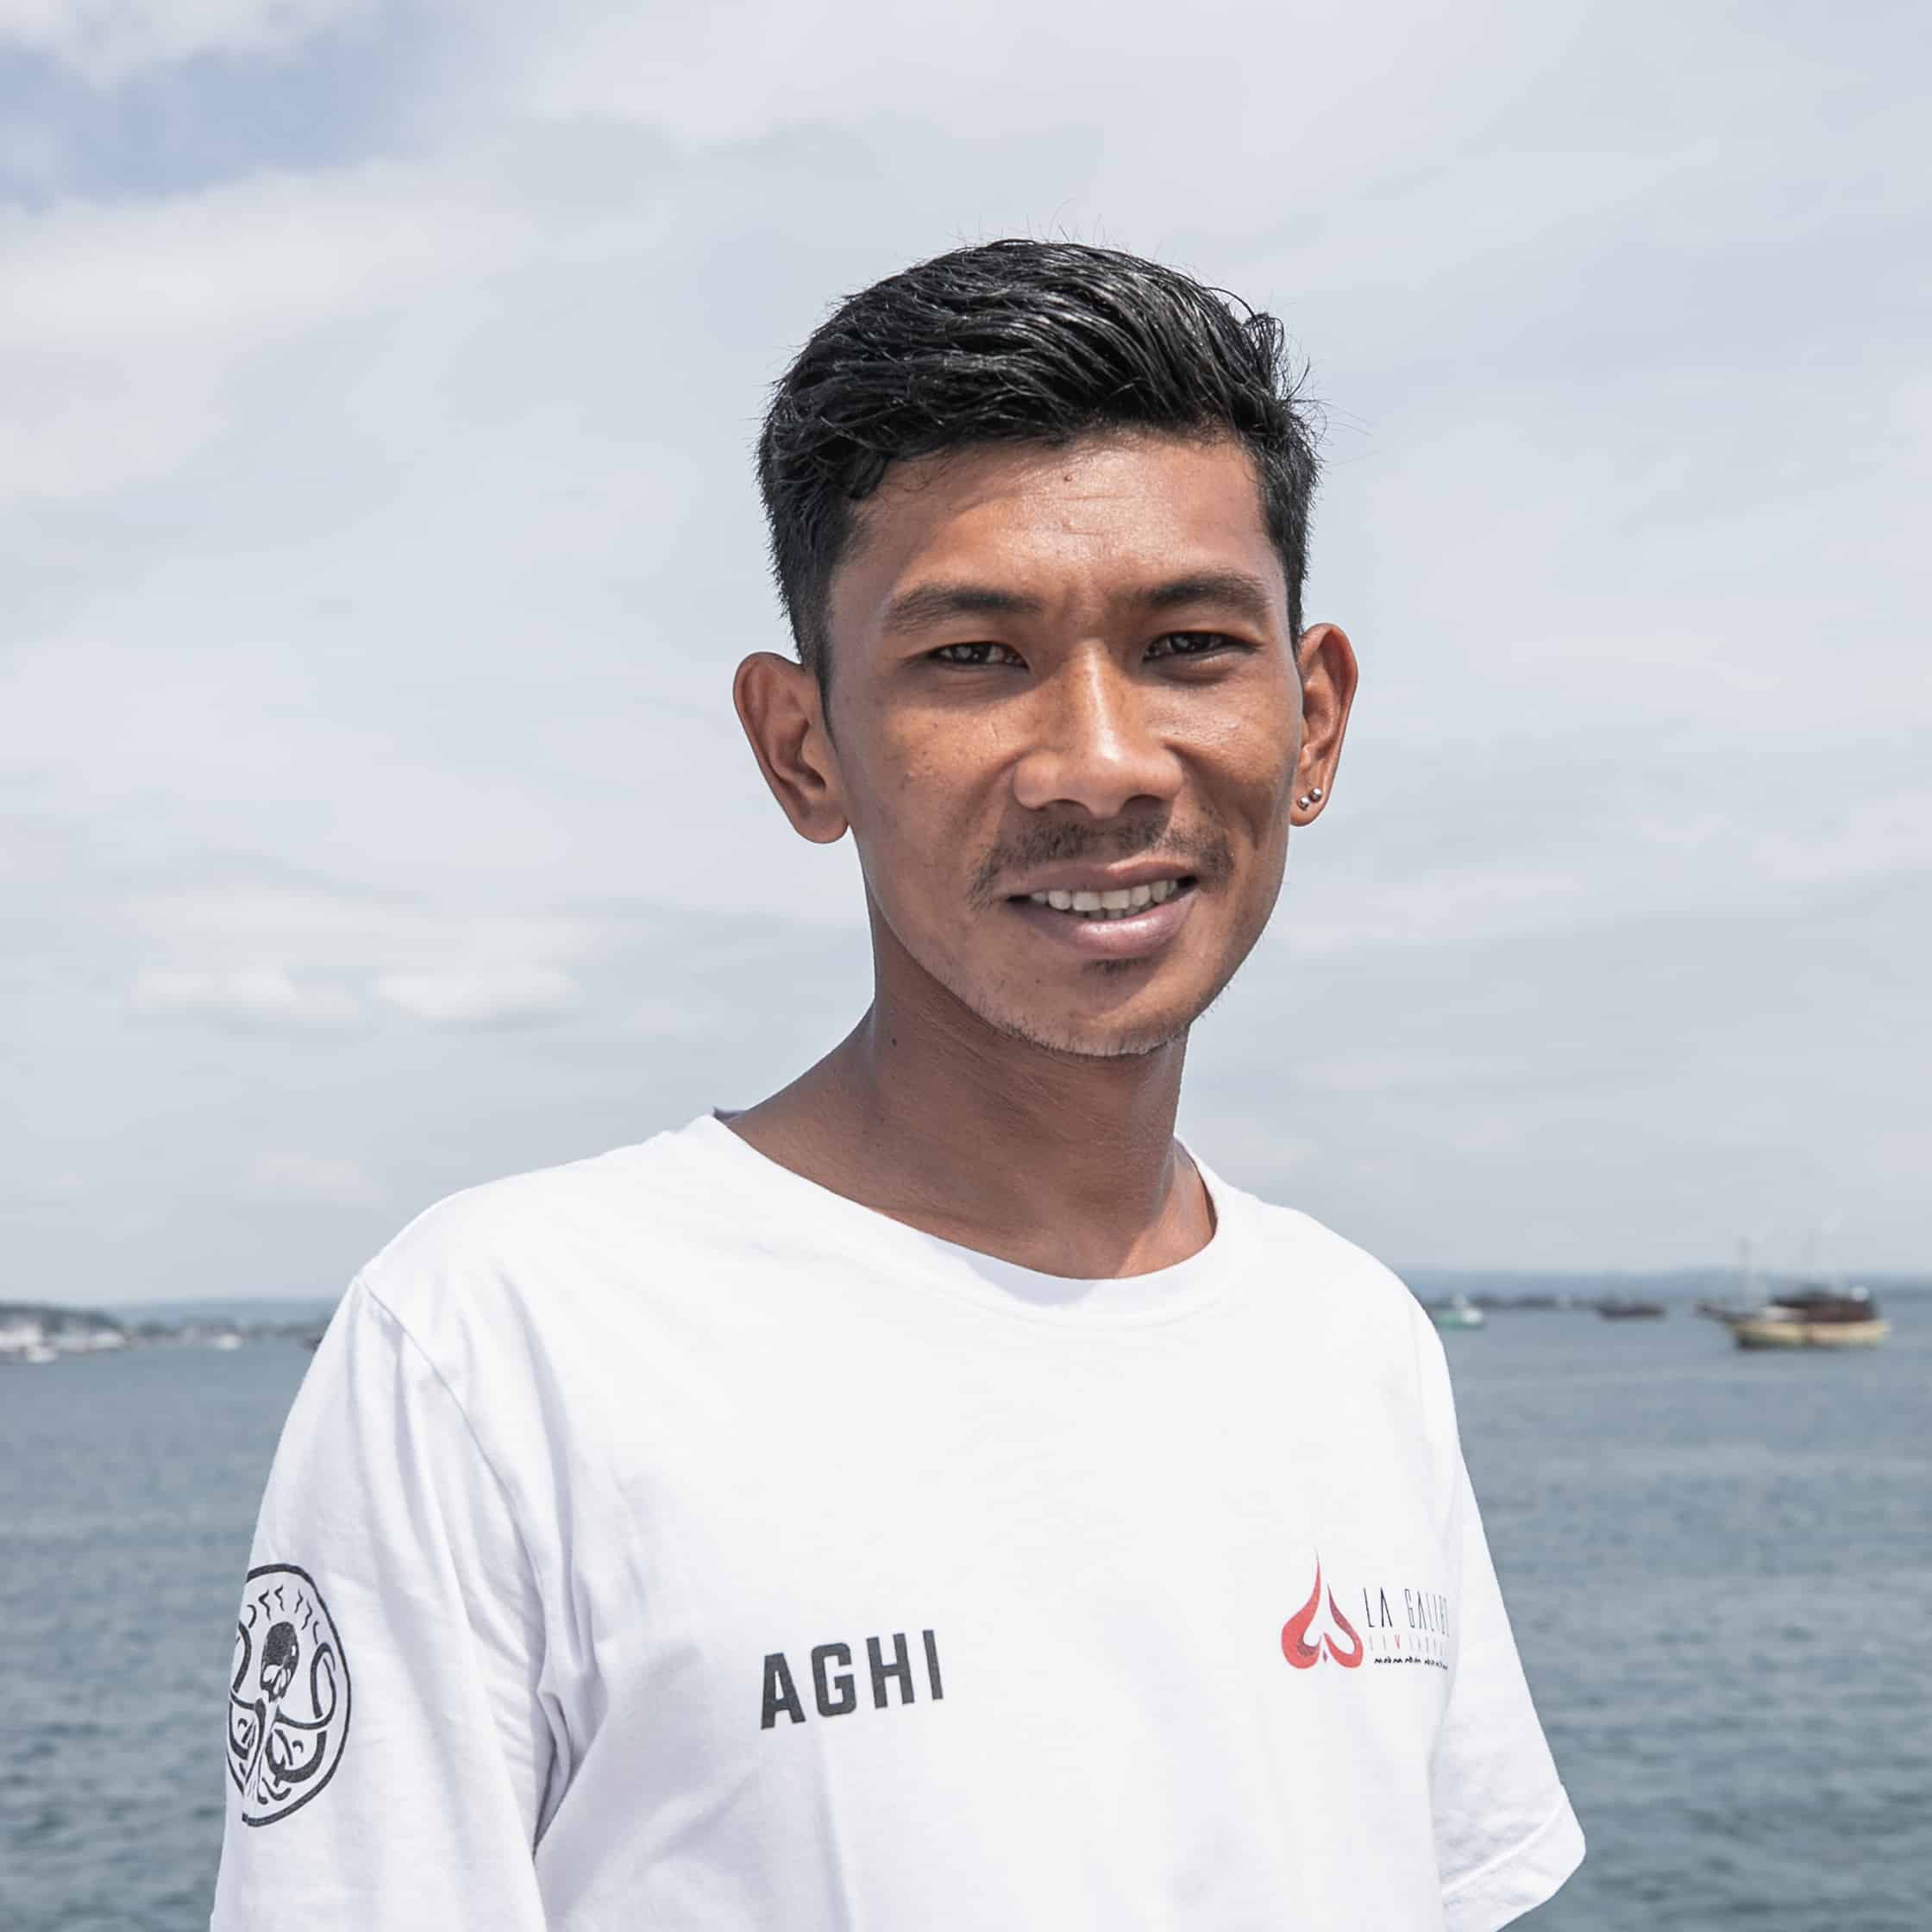 🇮🇩 Aghi